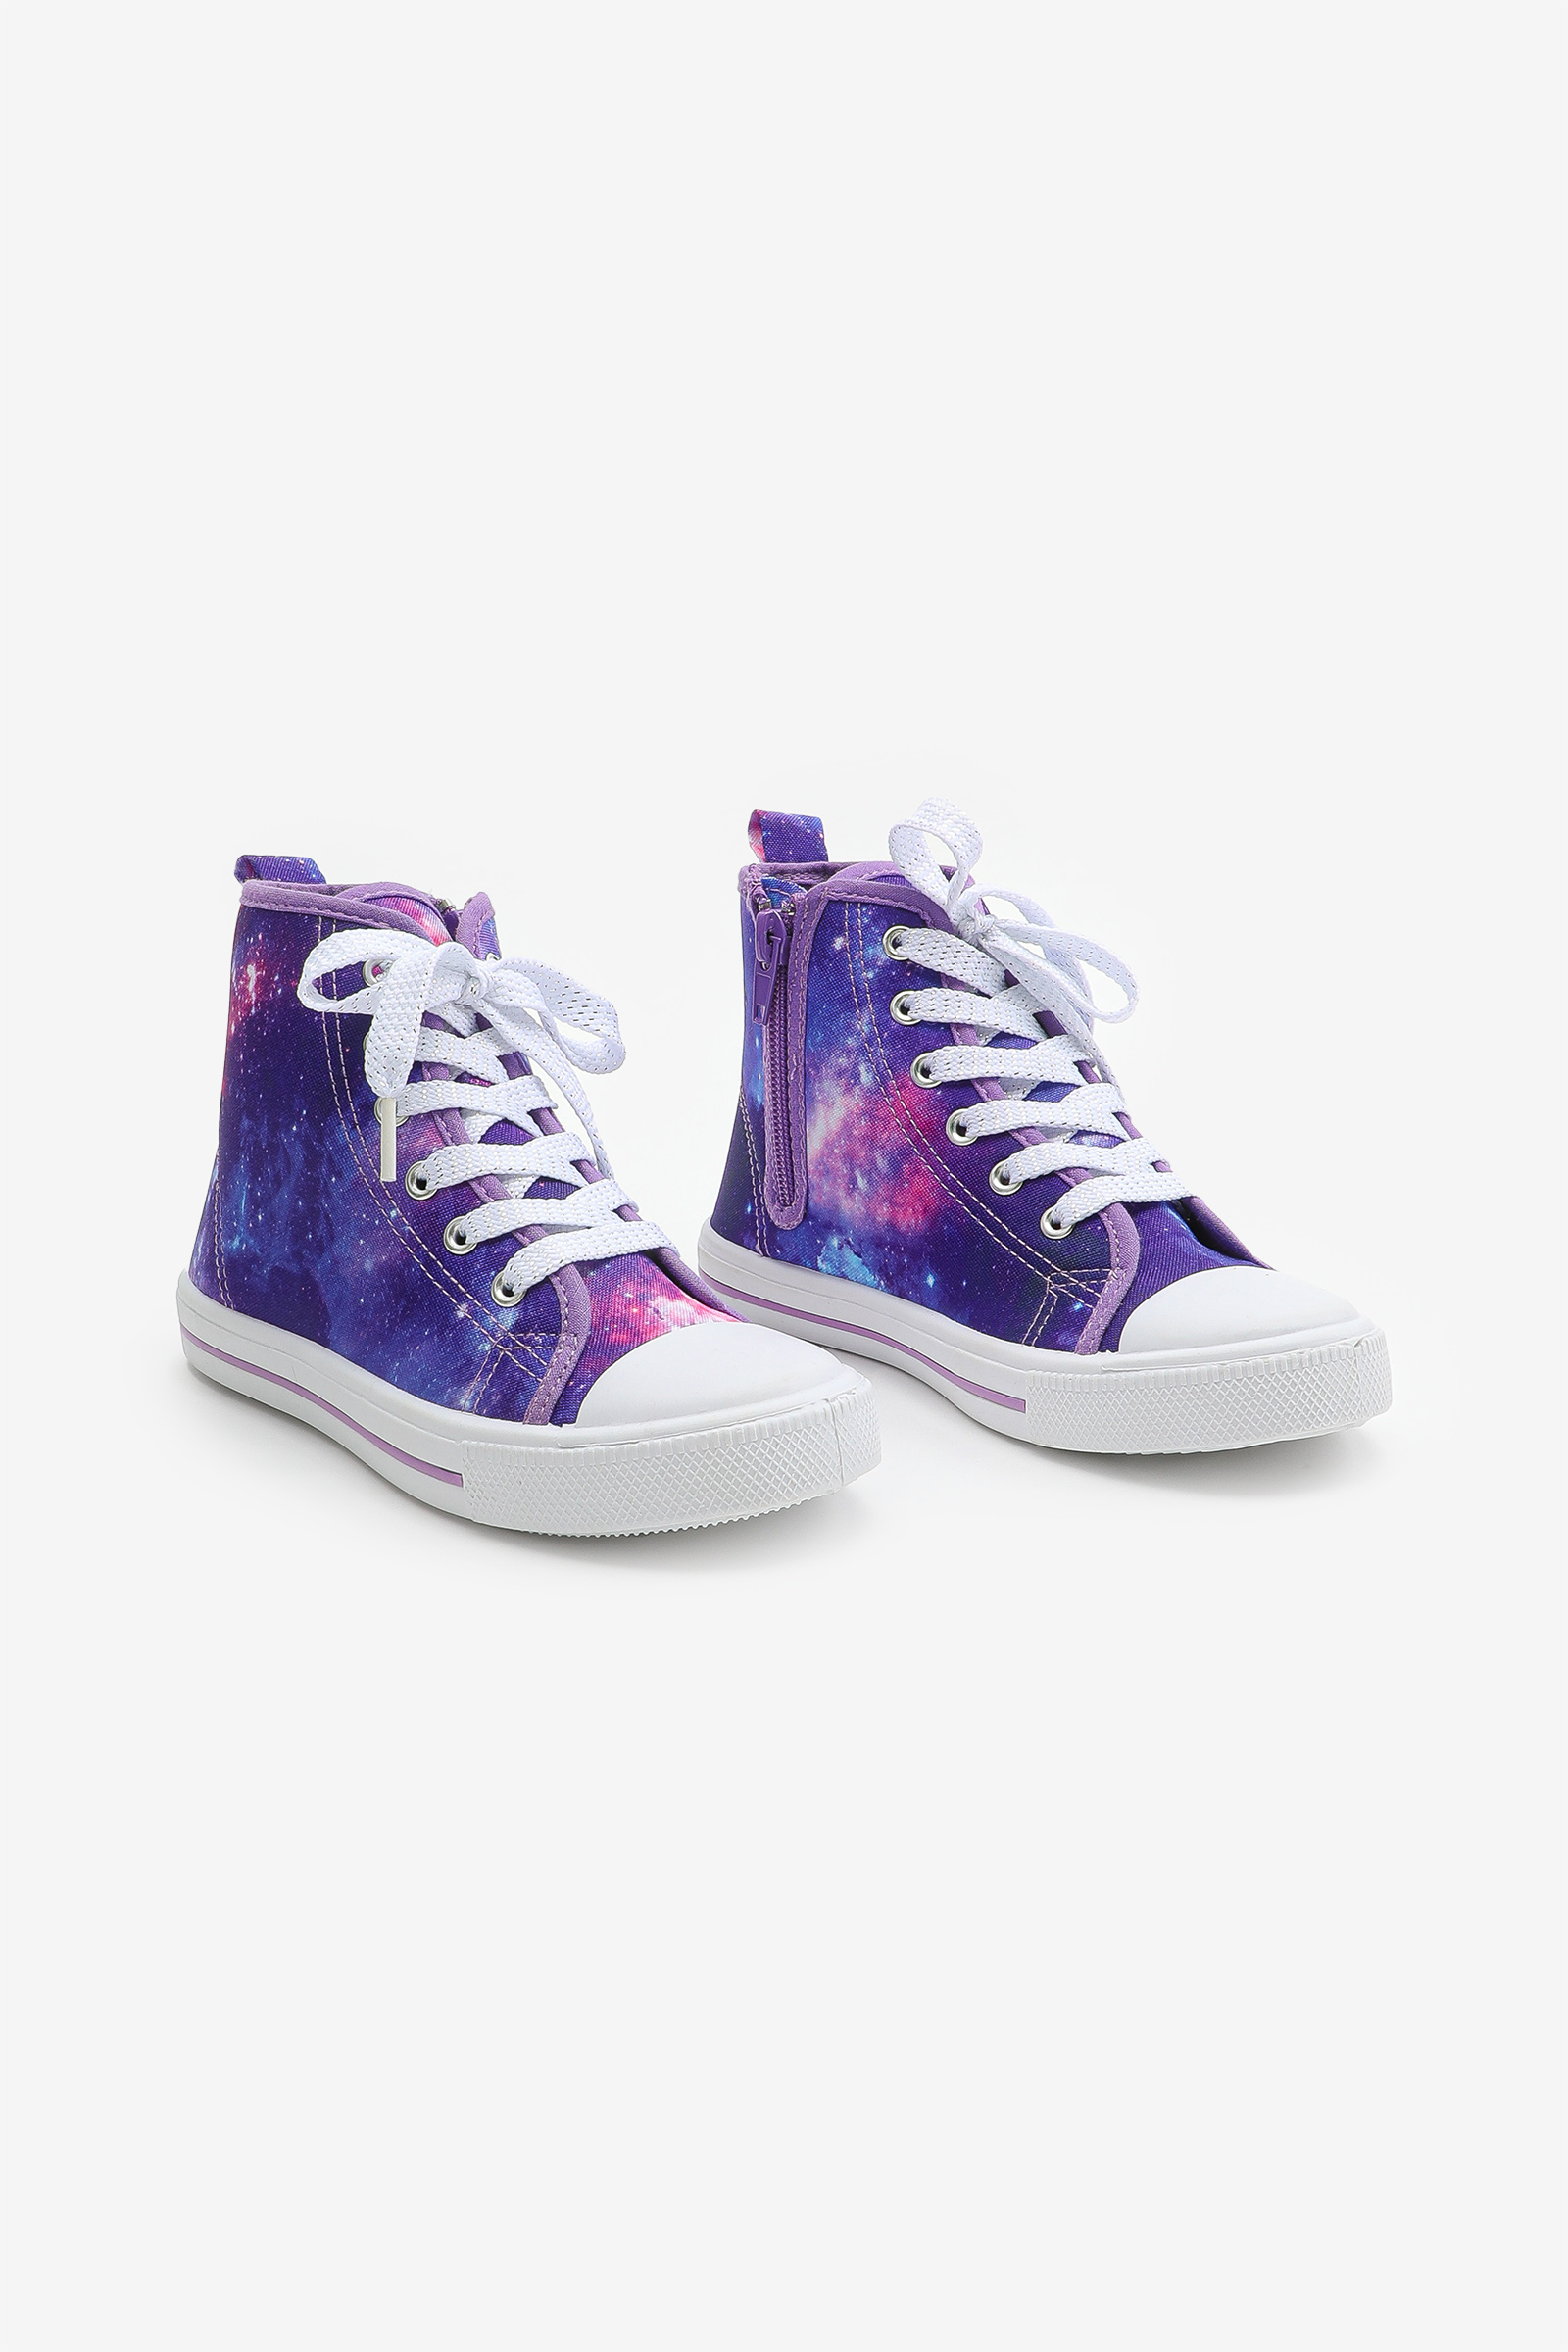 Galaxy High Top Sneakers for Girls